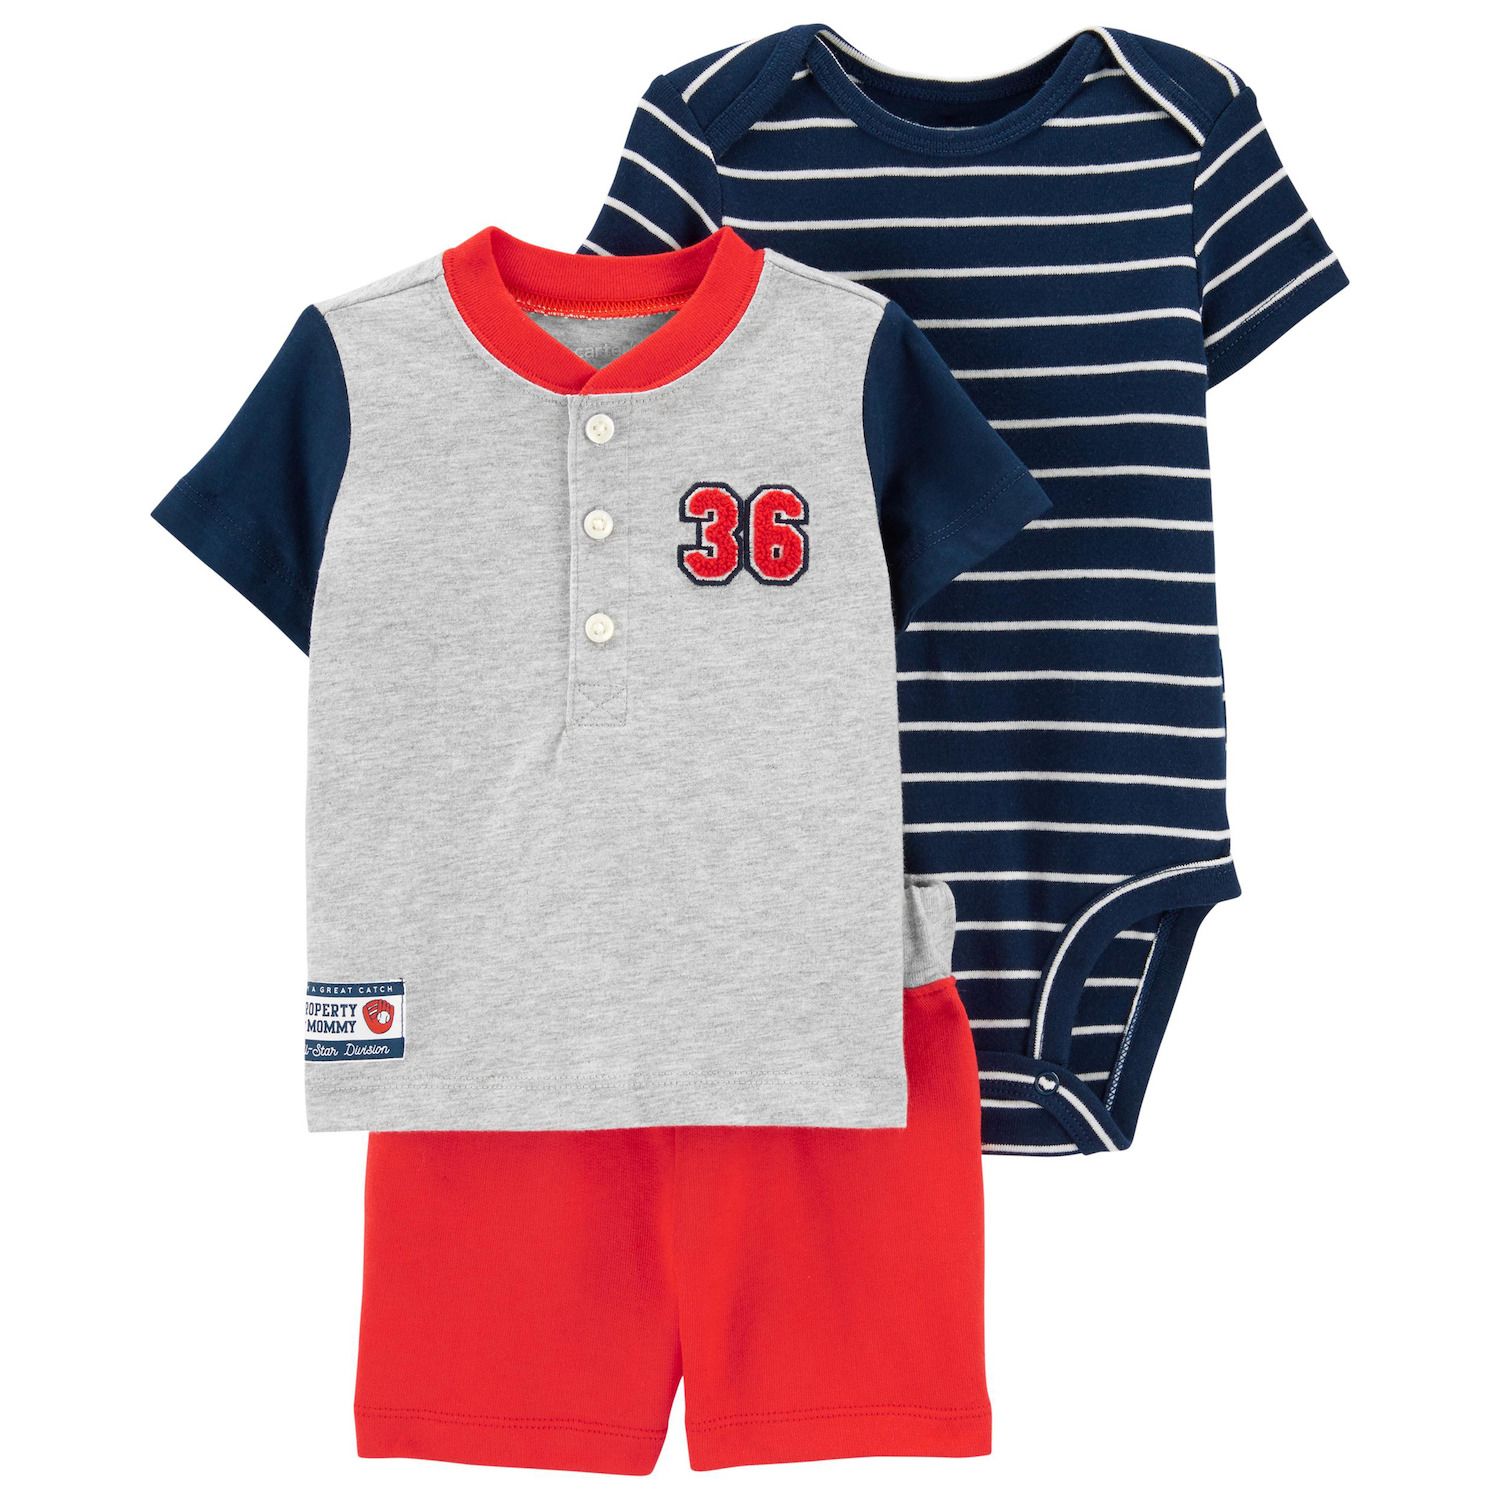 Clearance Grey Carter's Baby | Kohl's